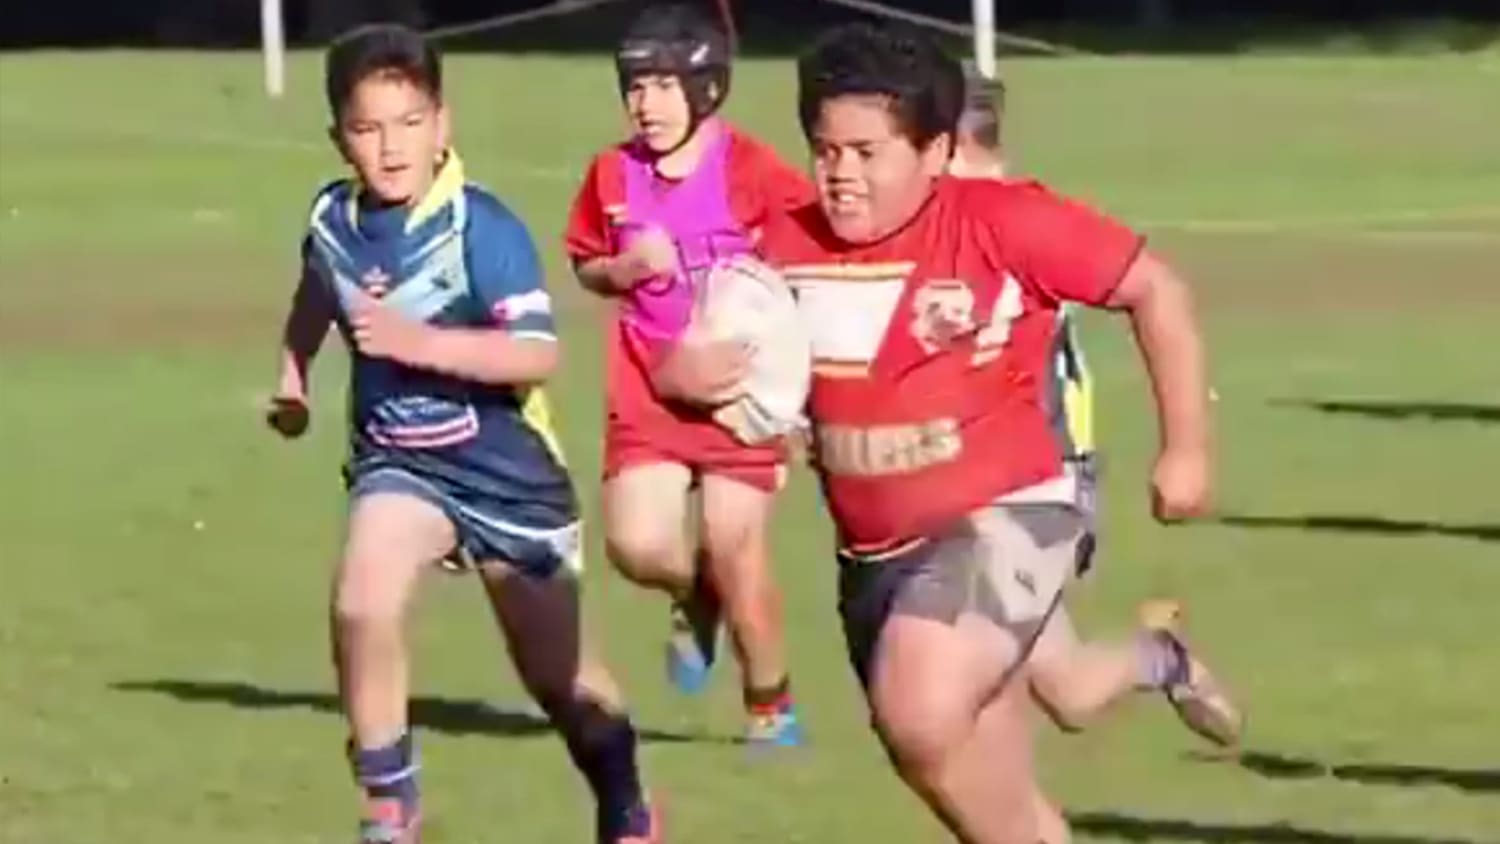 9-year-old rugby sensation goes beast mode on his opponents